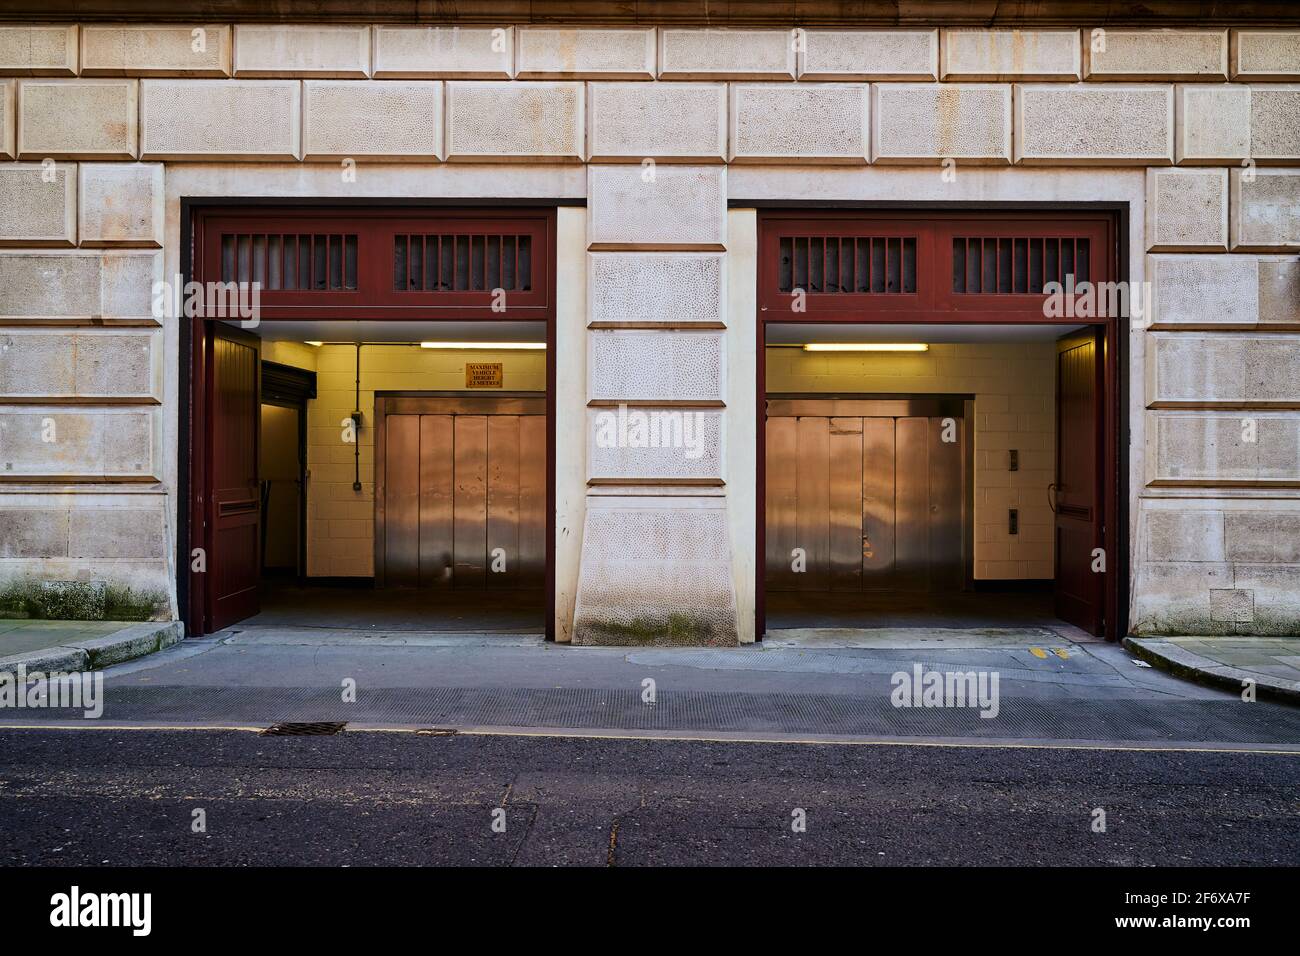 London, UK - 2 April 2021 : two building car entrance with garage lift a elevator doorway Stock Photo